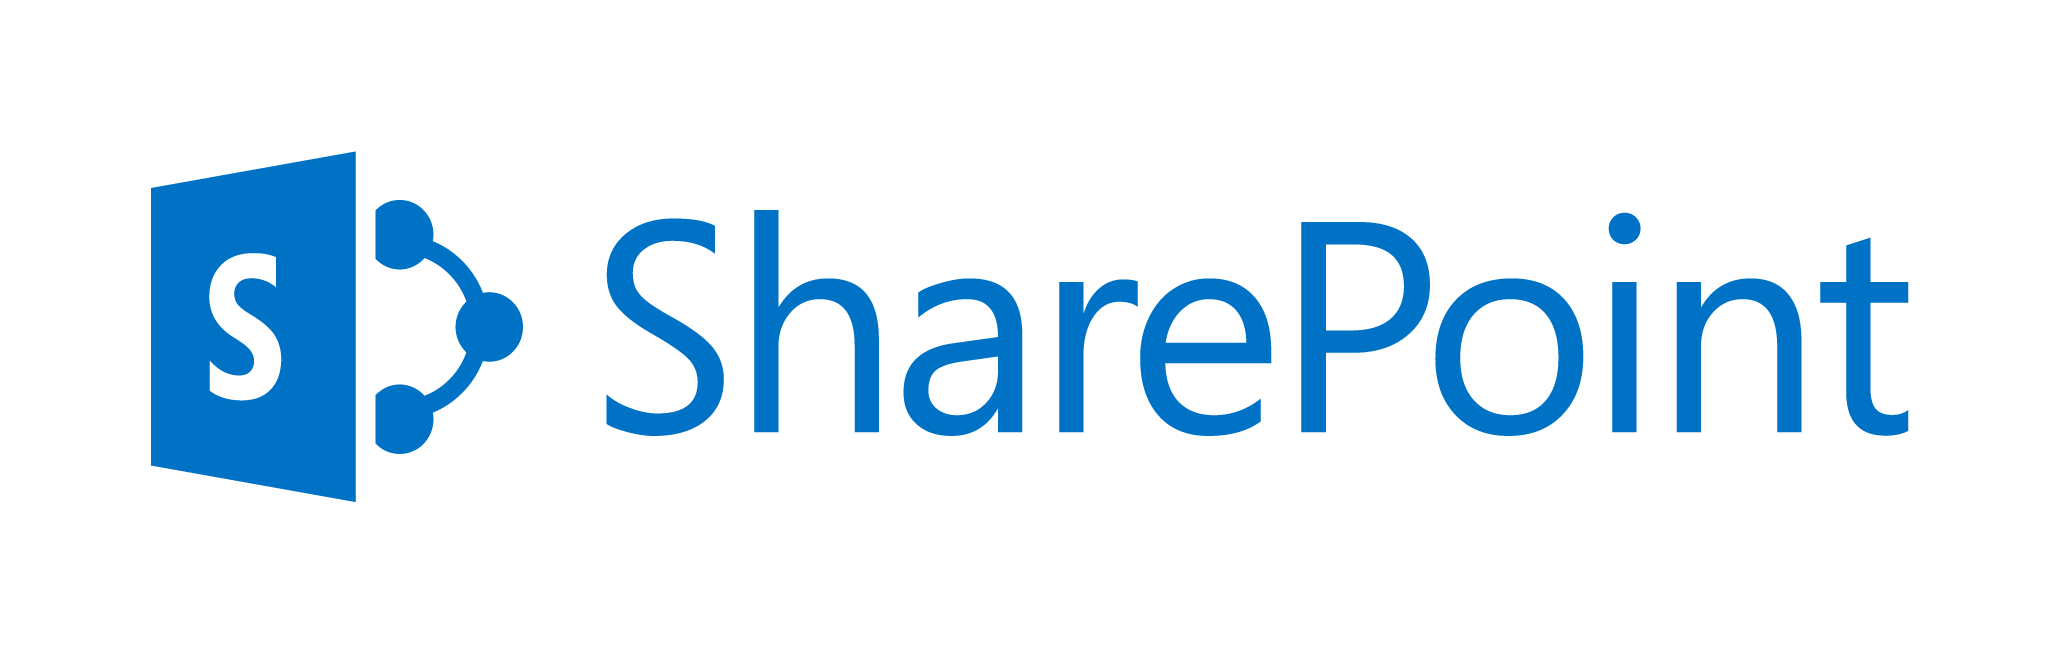 Microsoft Office 365 SharePoint Logo - SharePoint Page MetaData Coming Soon to SharePoint Office 365 ...